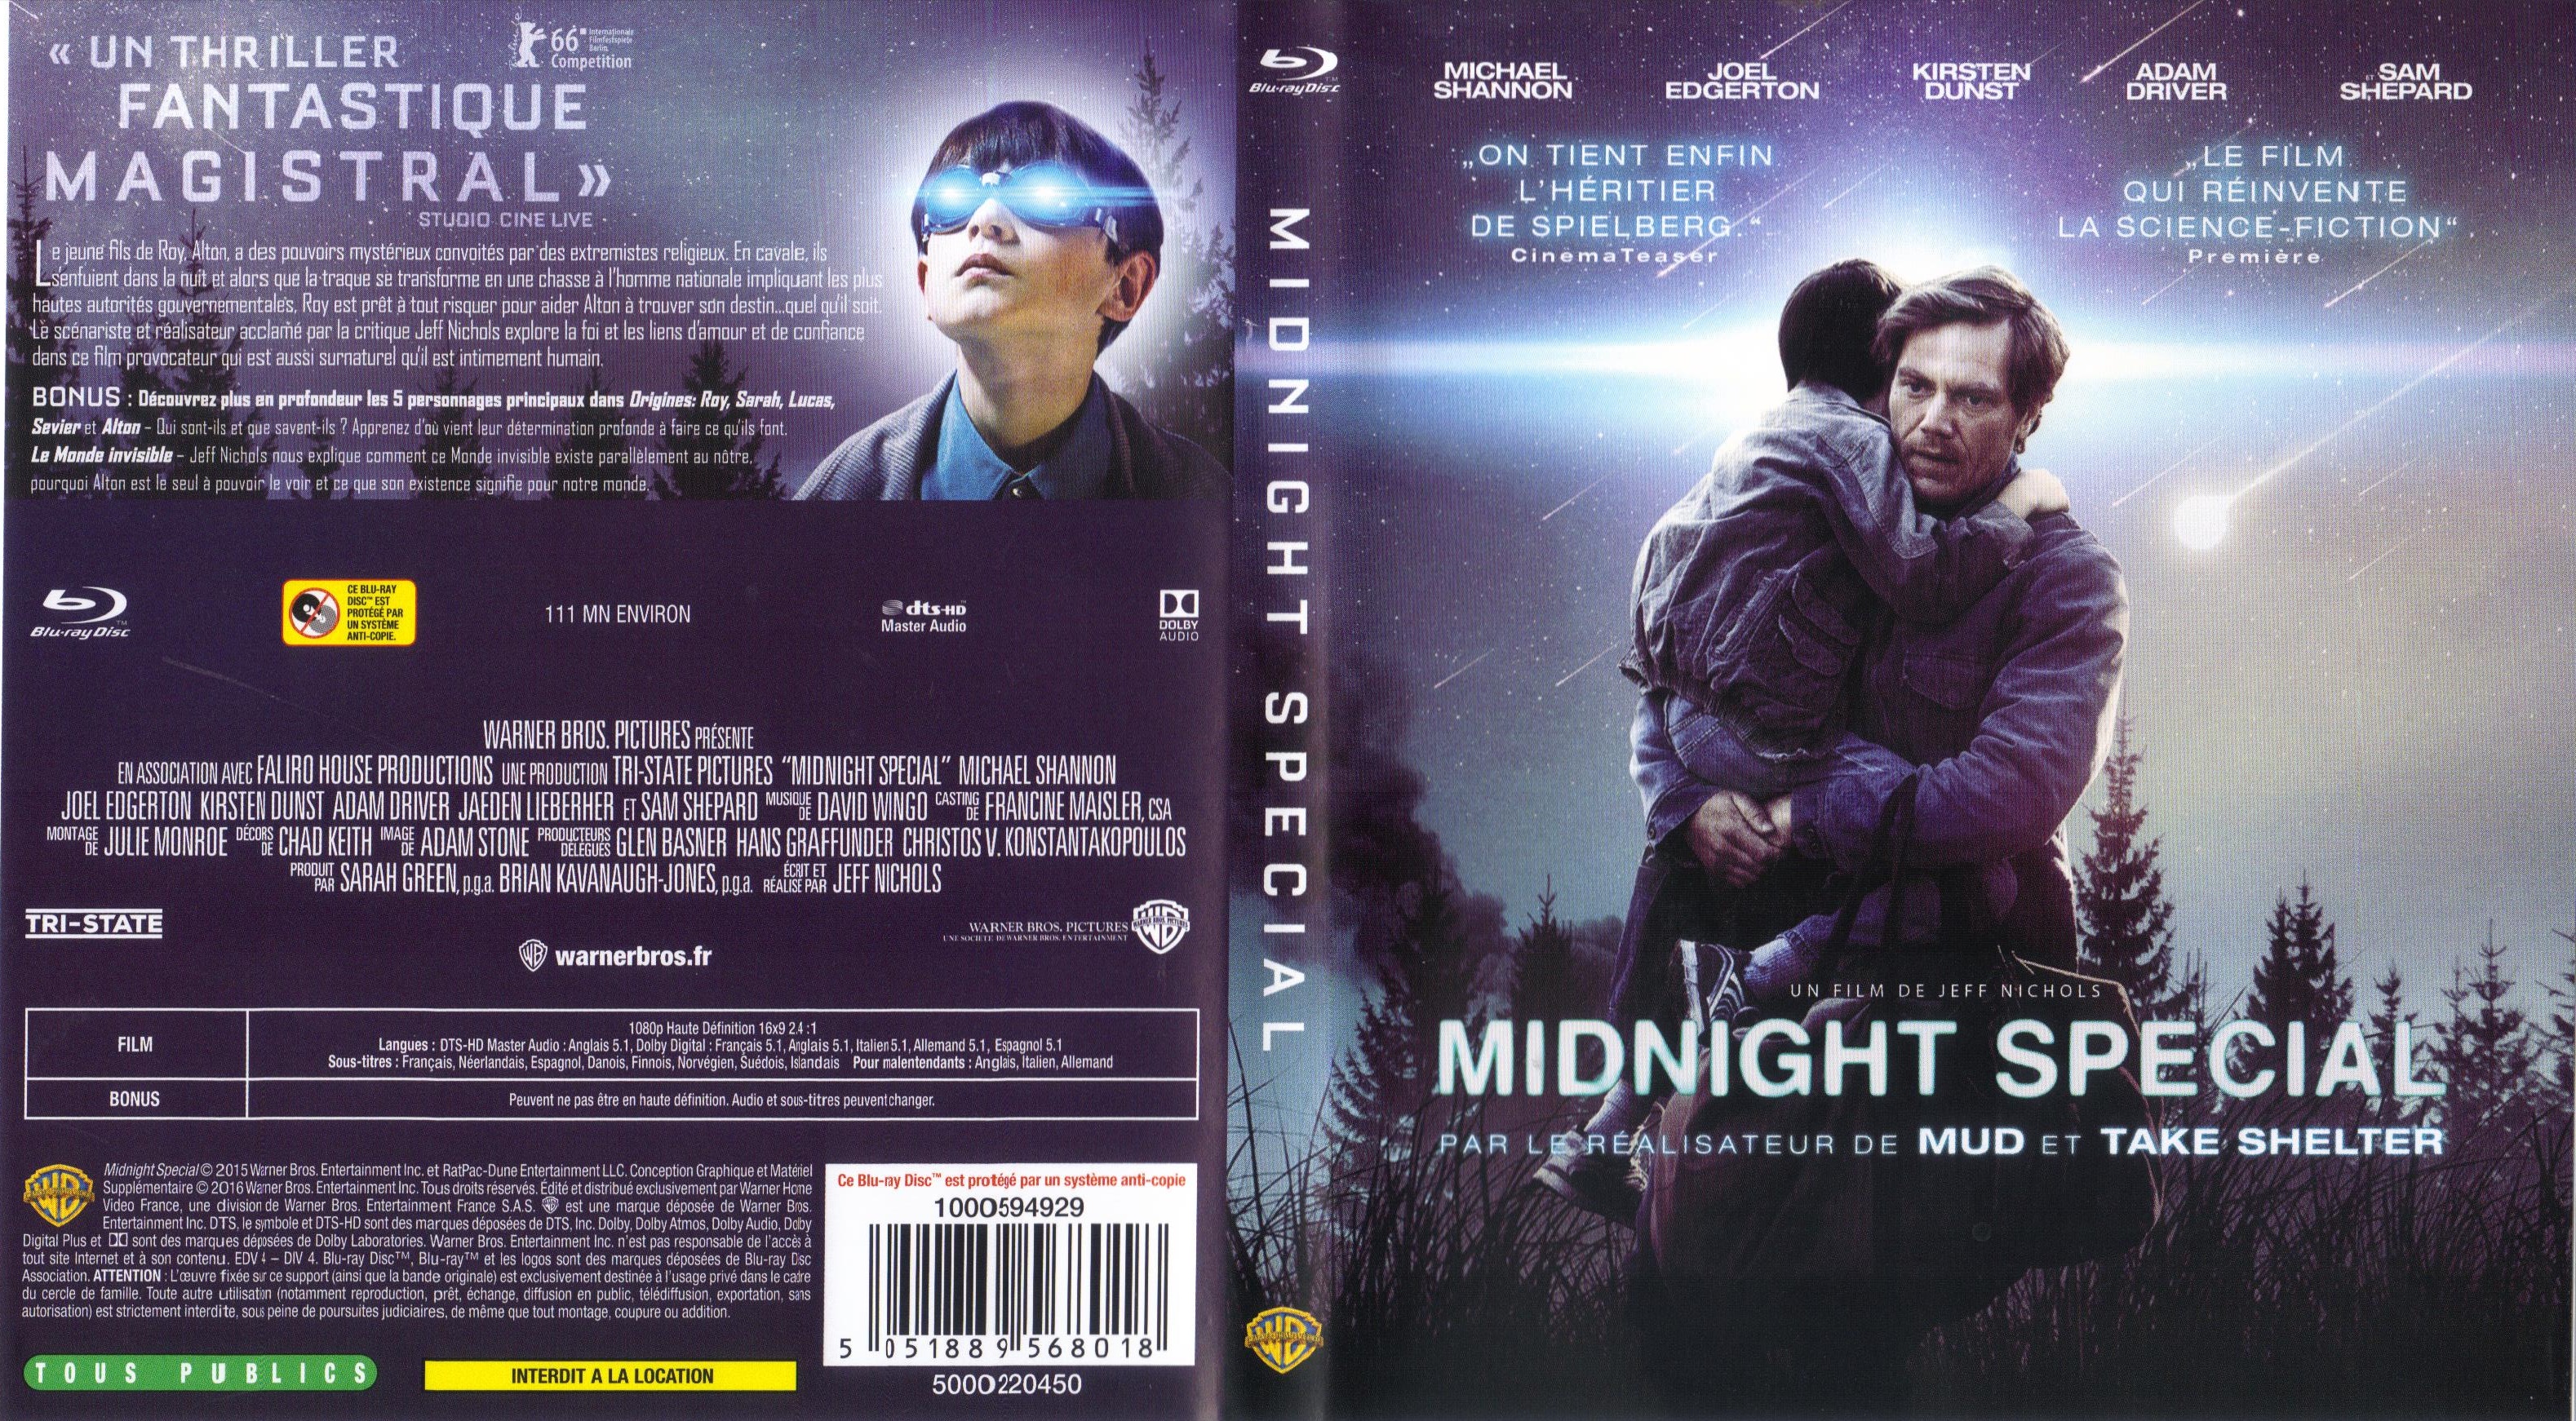 Jaquette DVD Midnight Special (BLU-RAY)